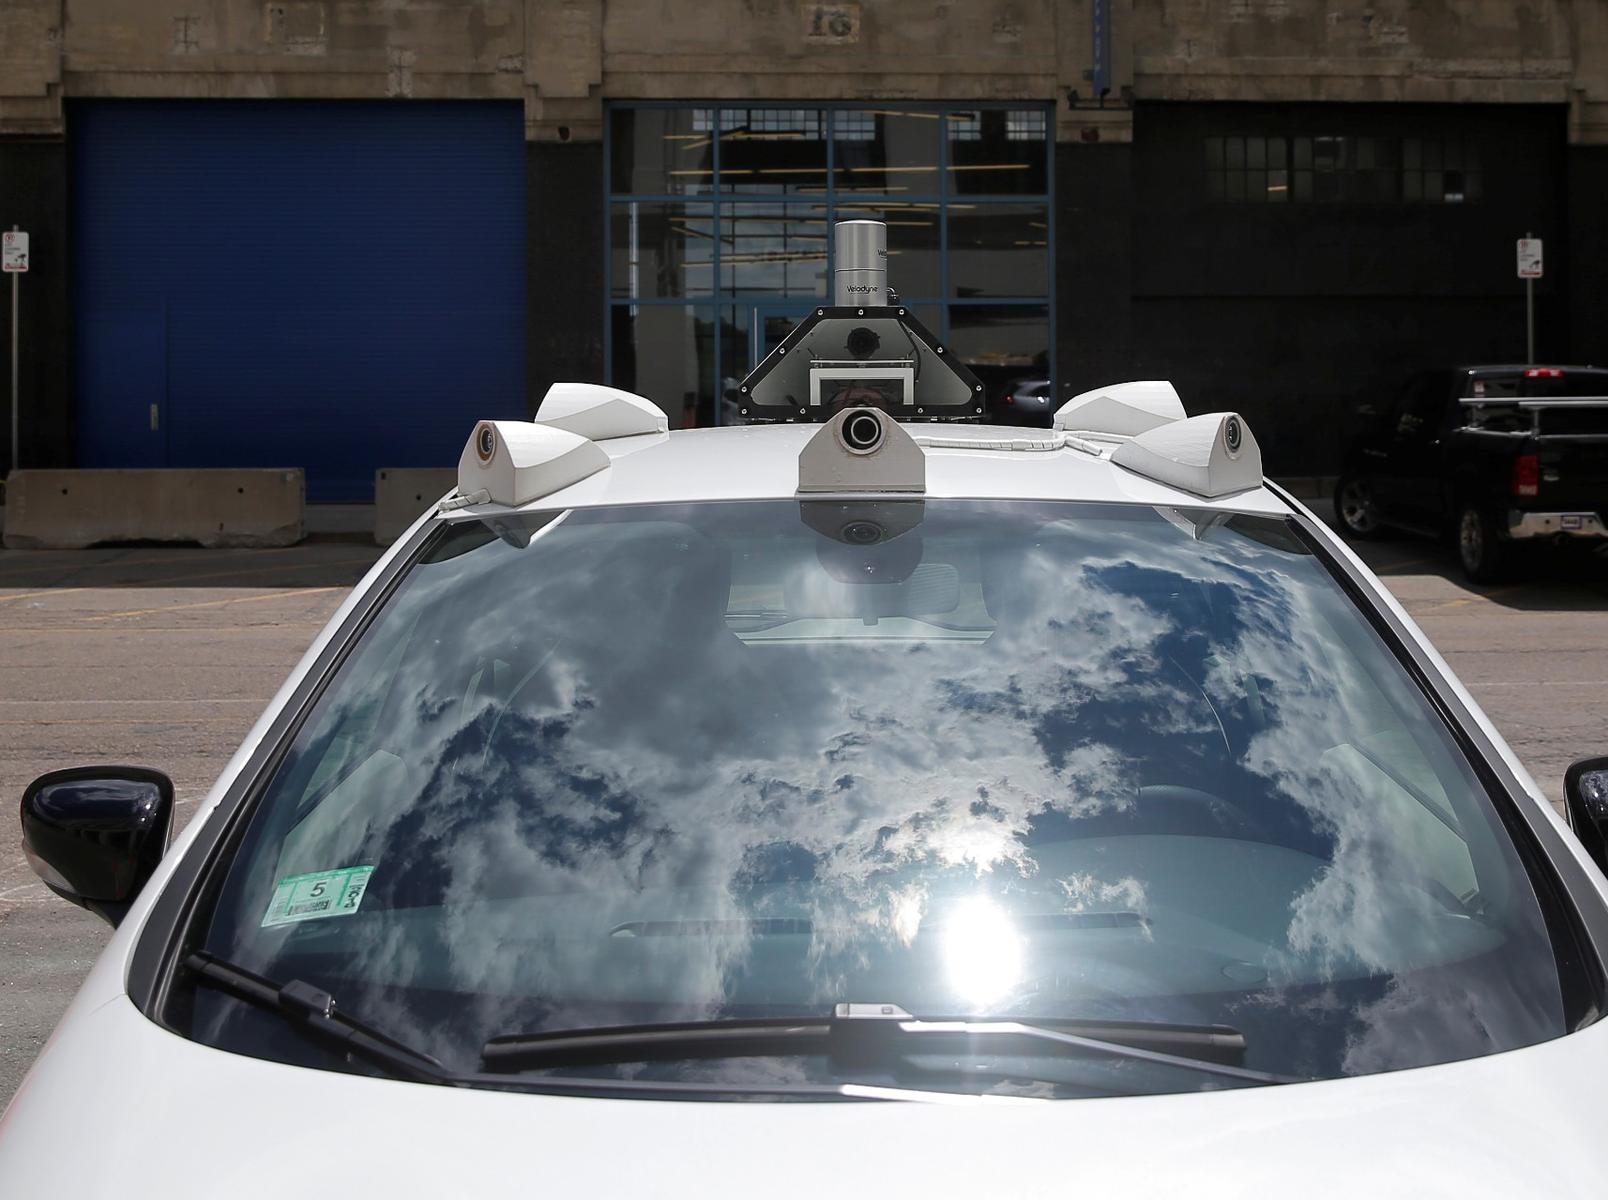 The Best Defense: Preparing to Share the Road with Self-Driving Cars